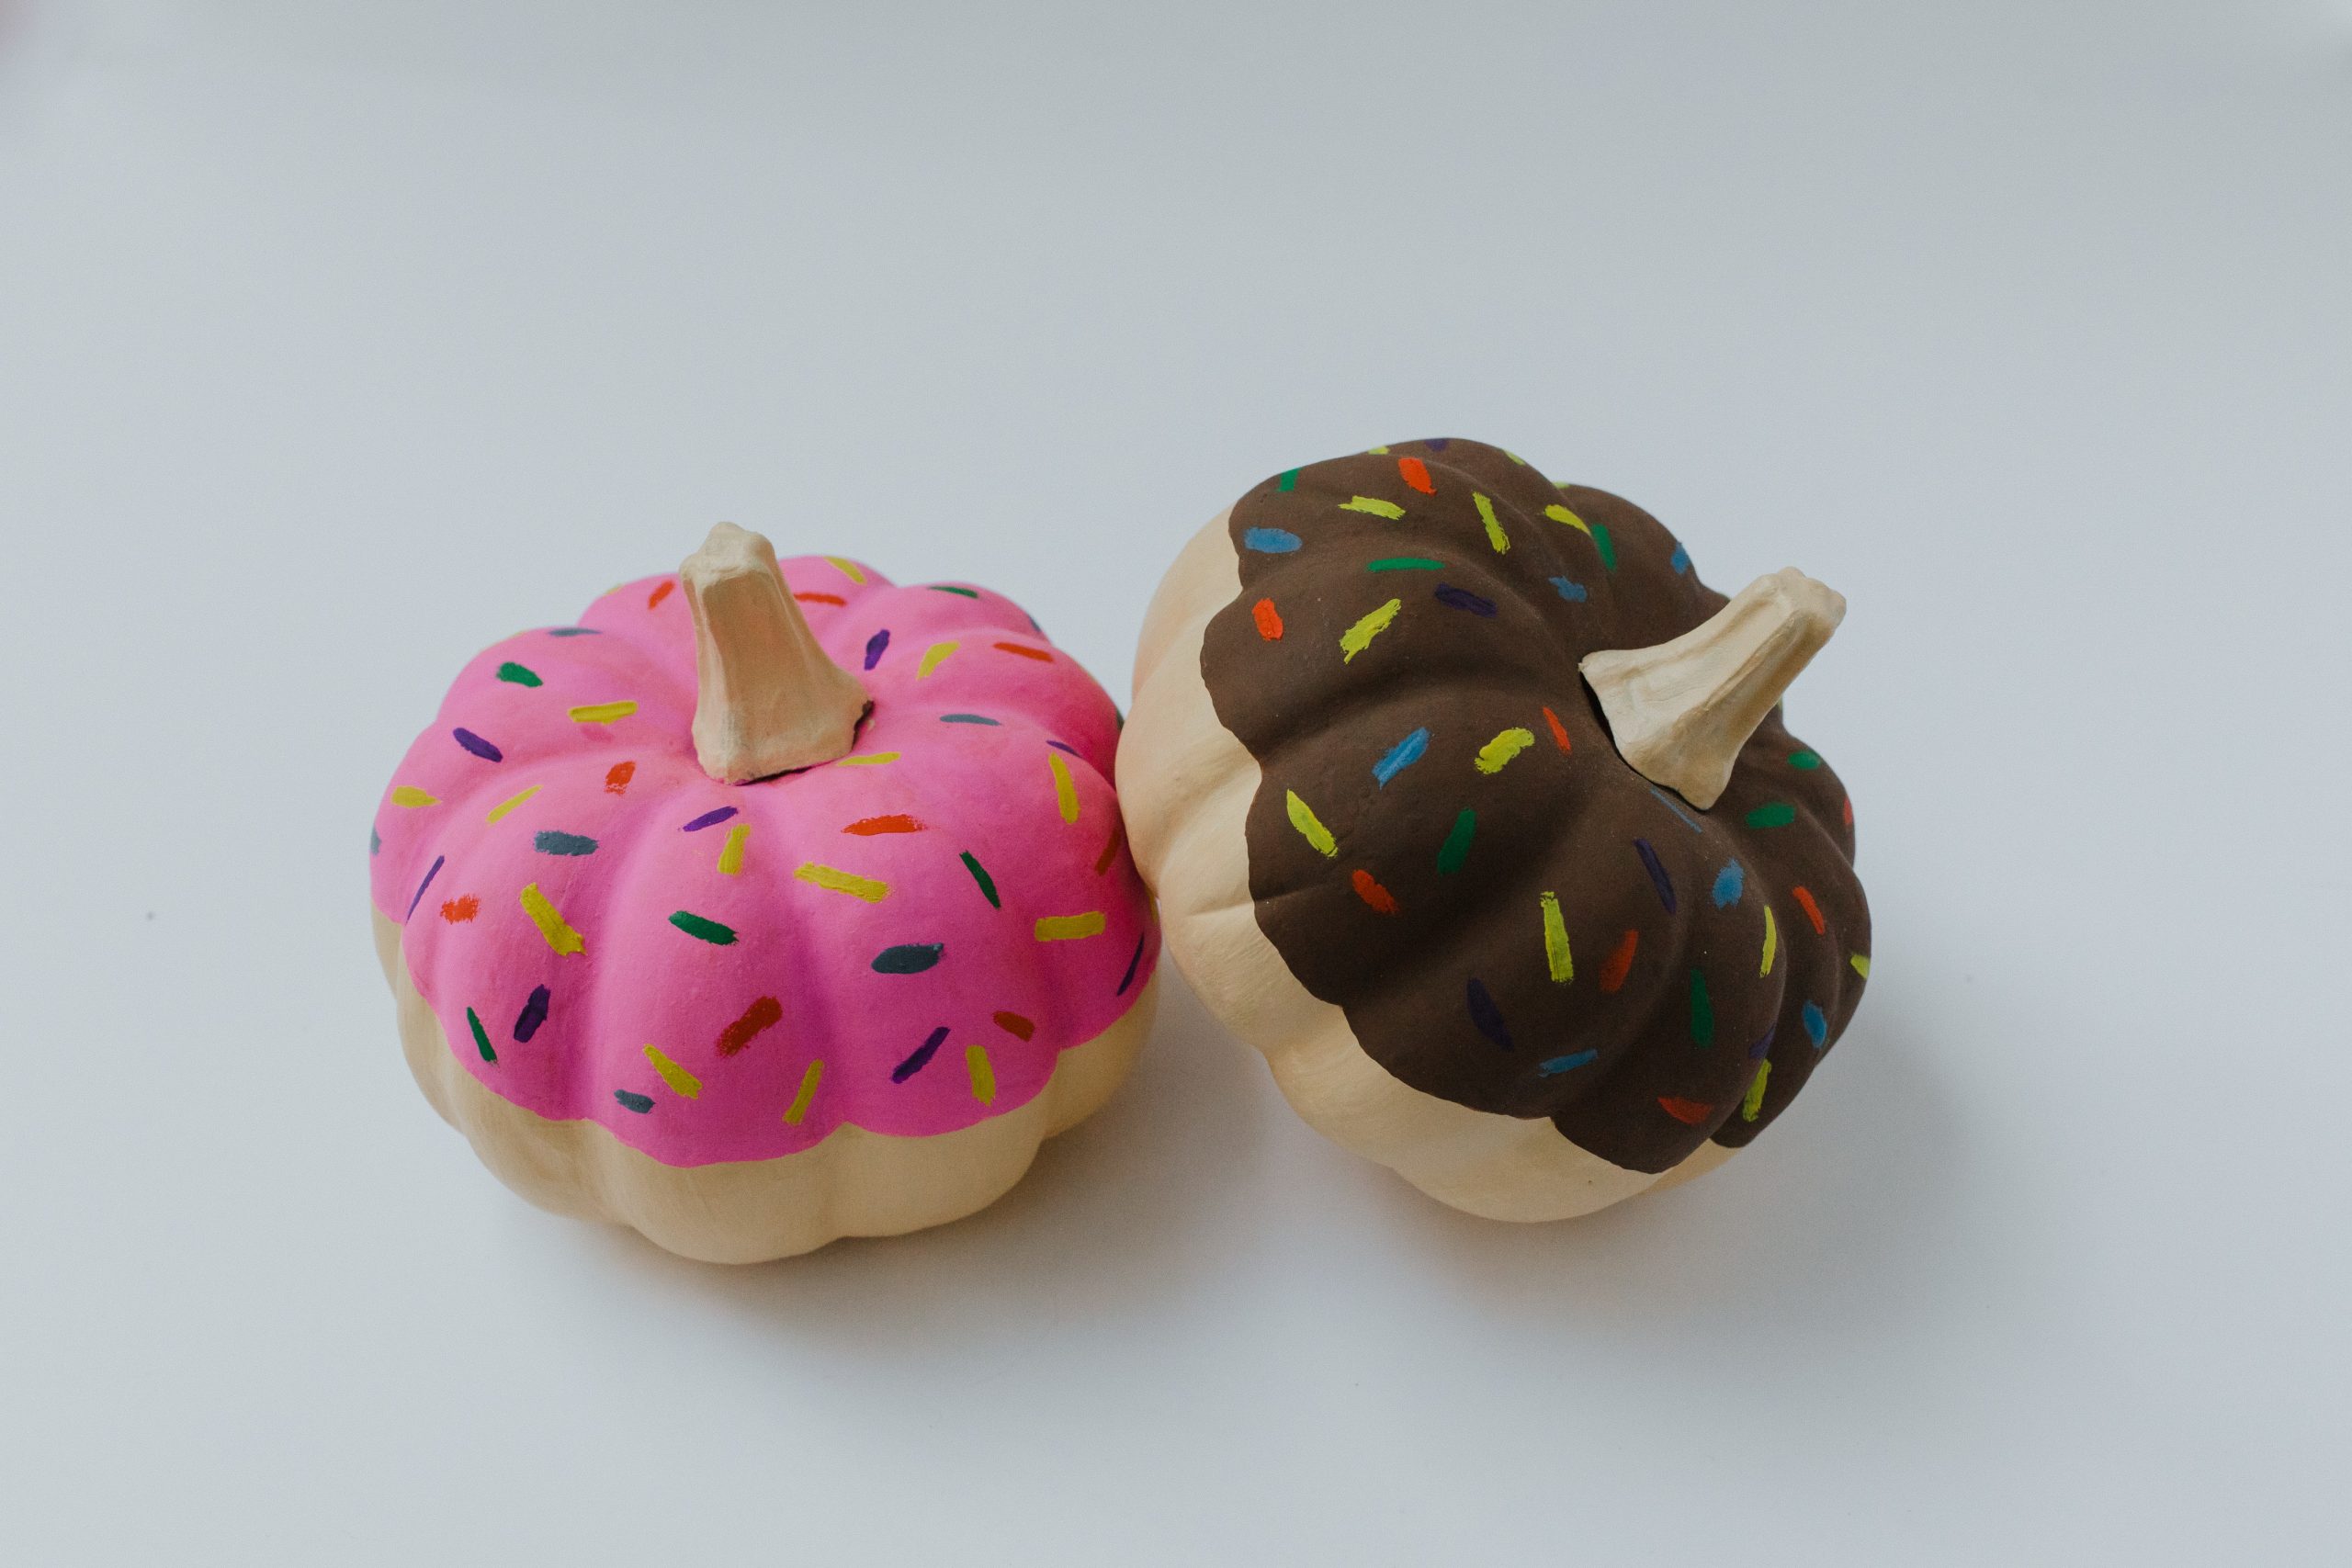 Pumpkins painted to resemble donuts.